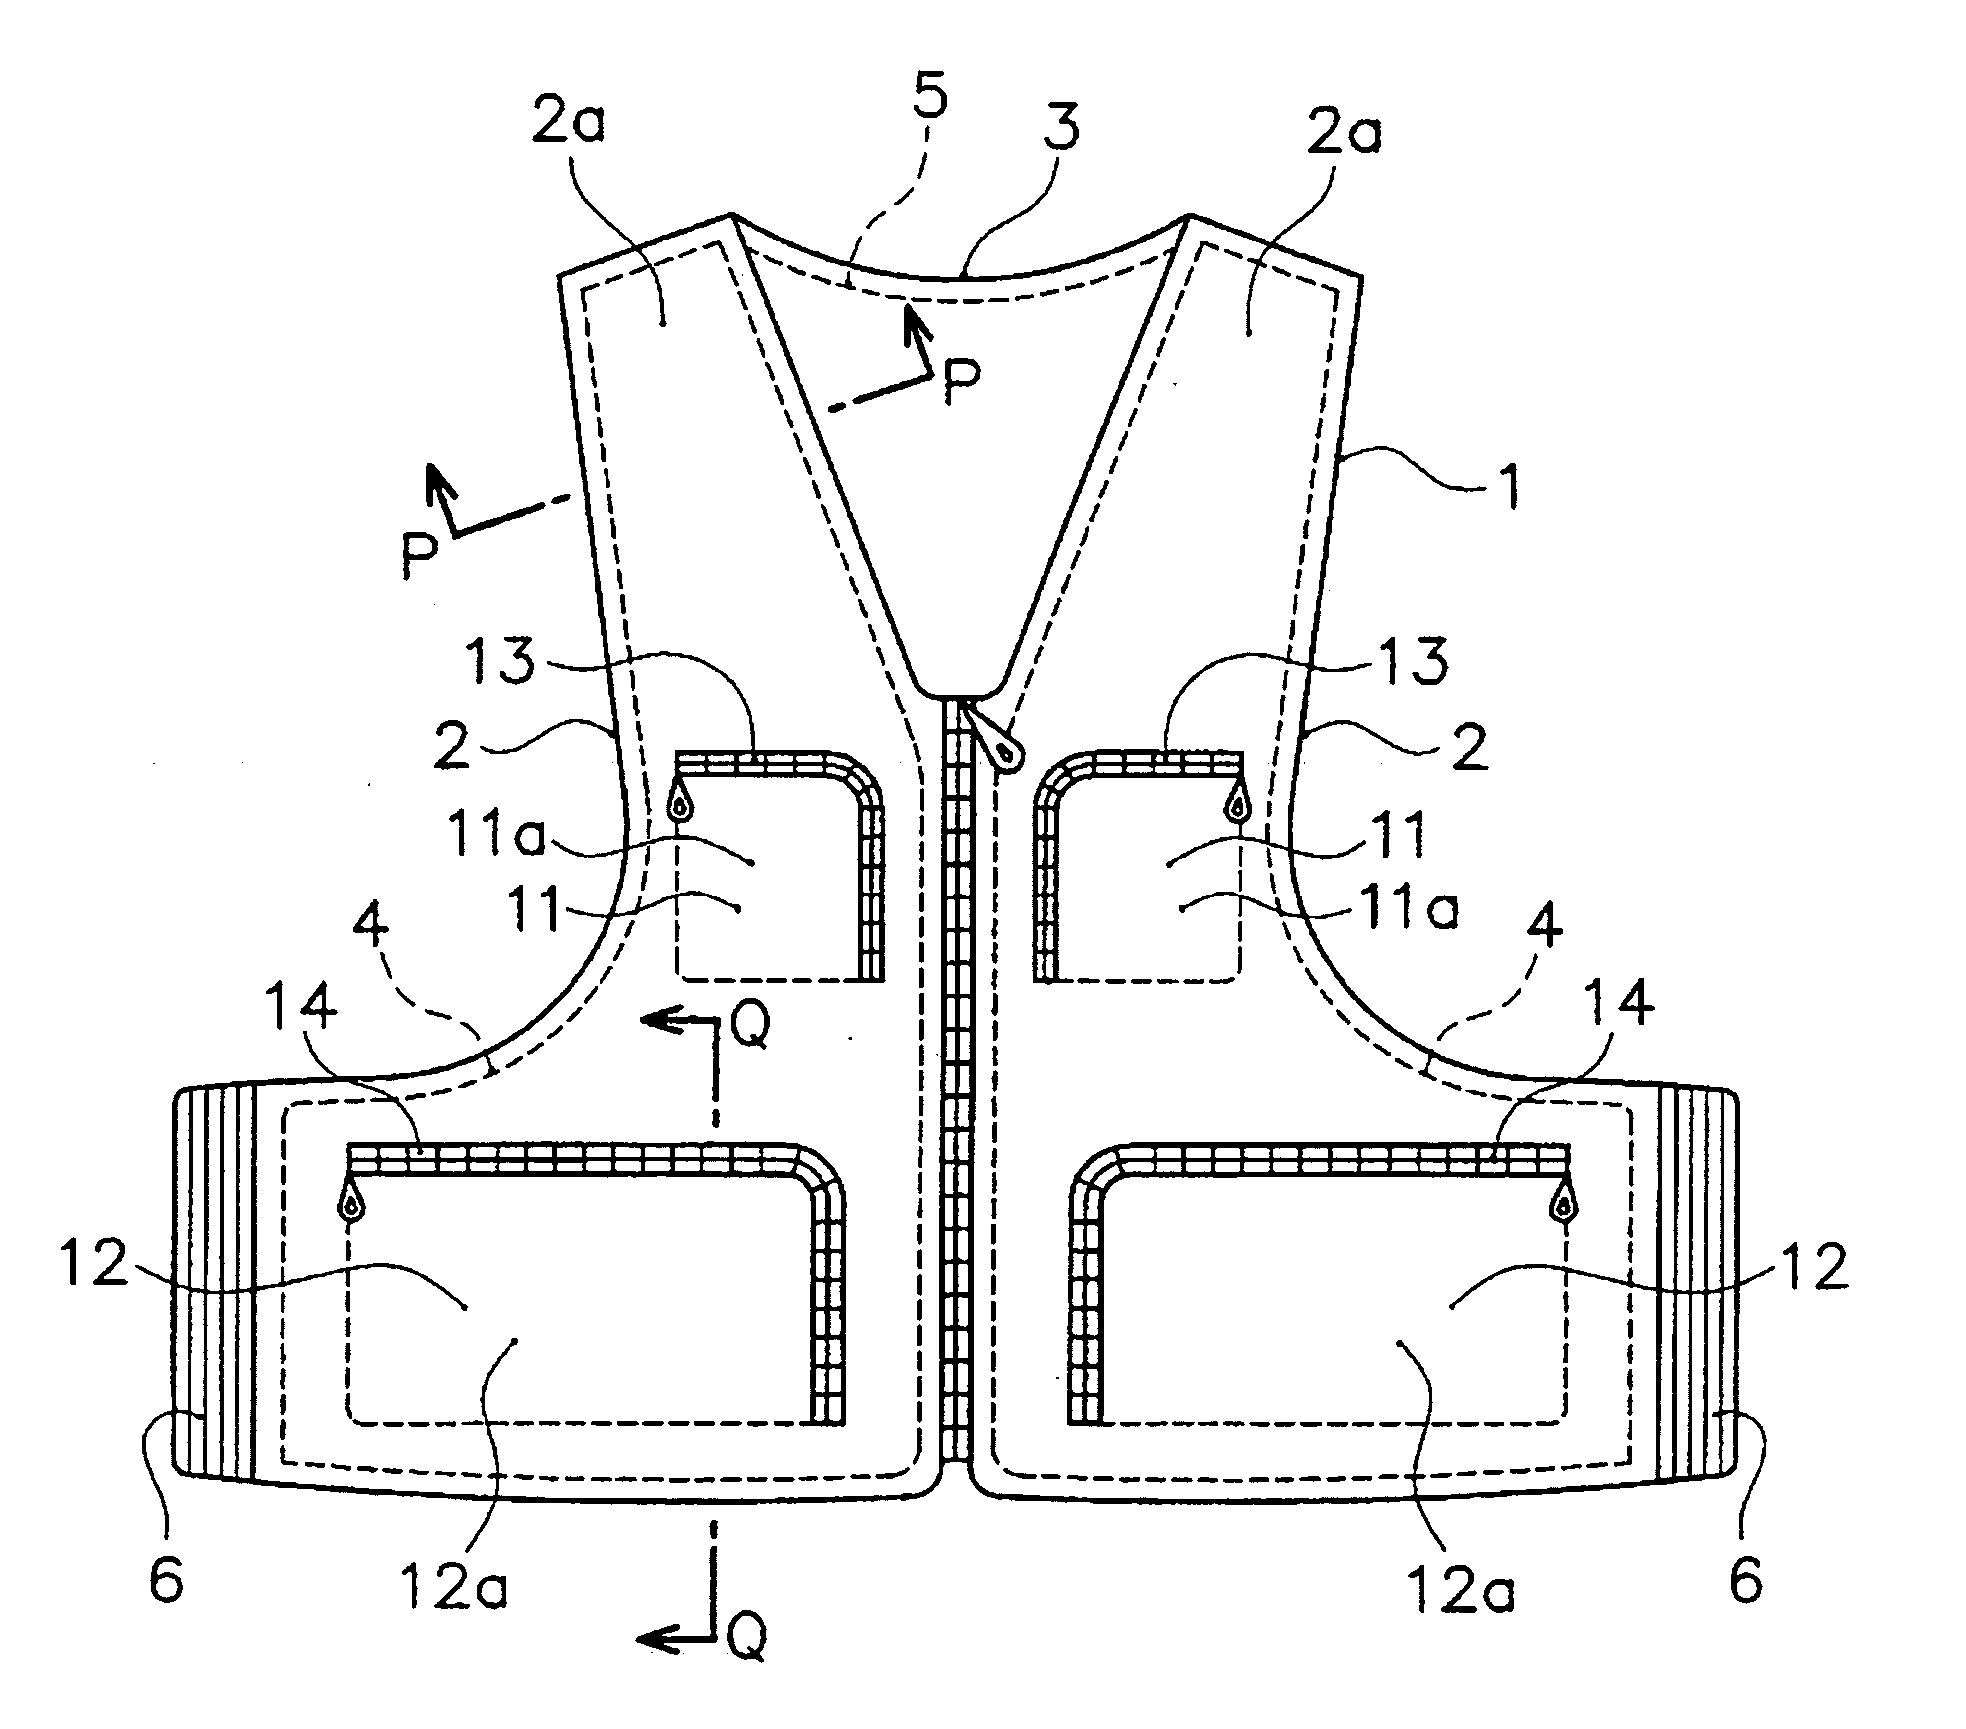 Article of clothing with buoyant material